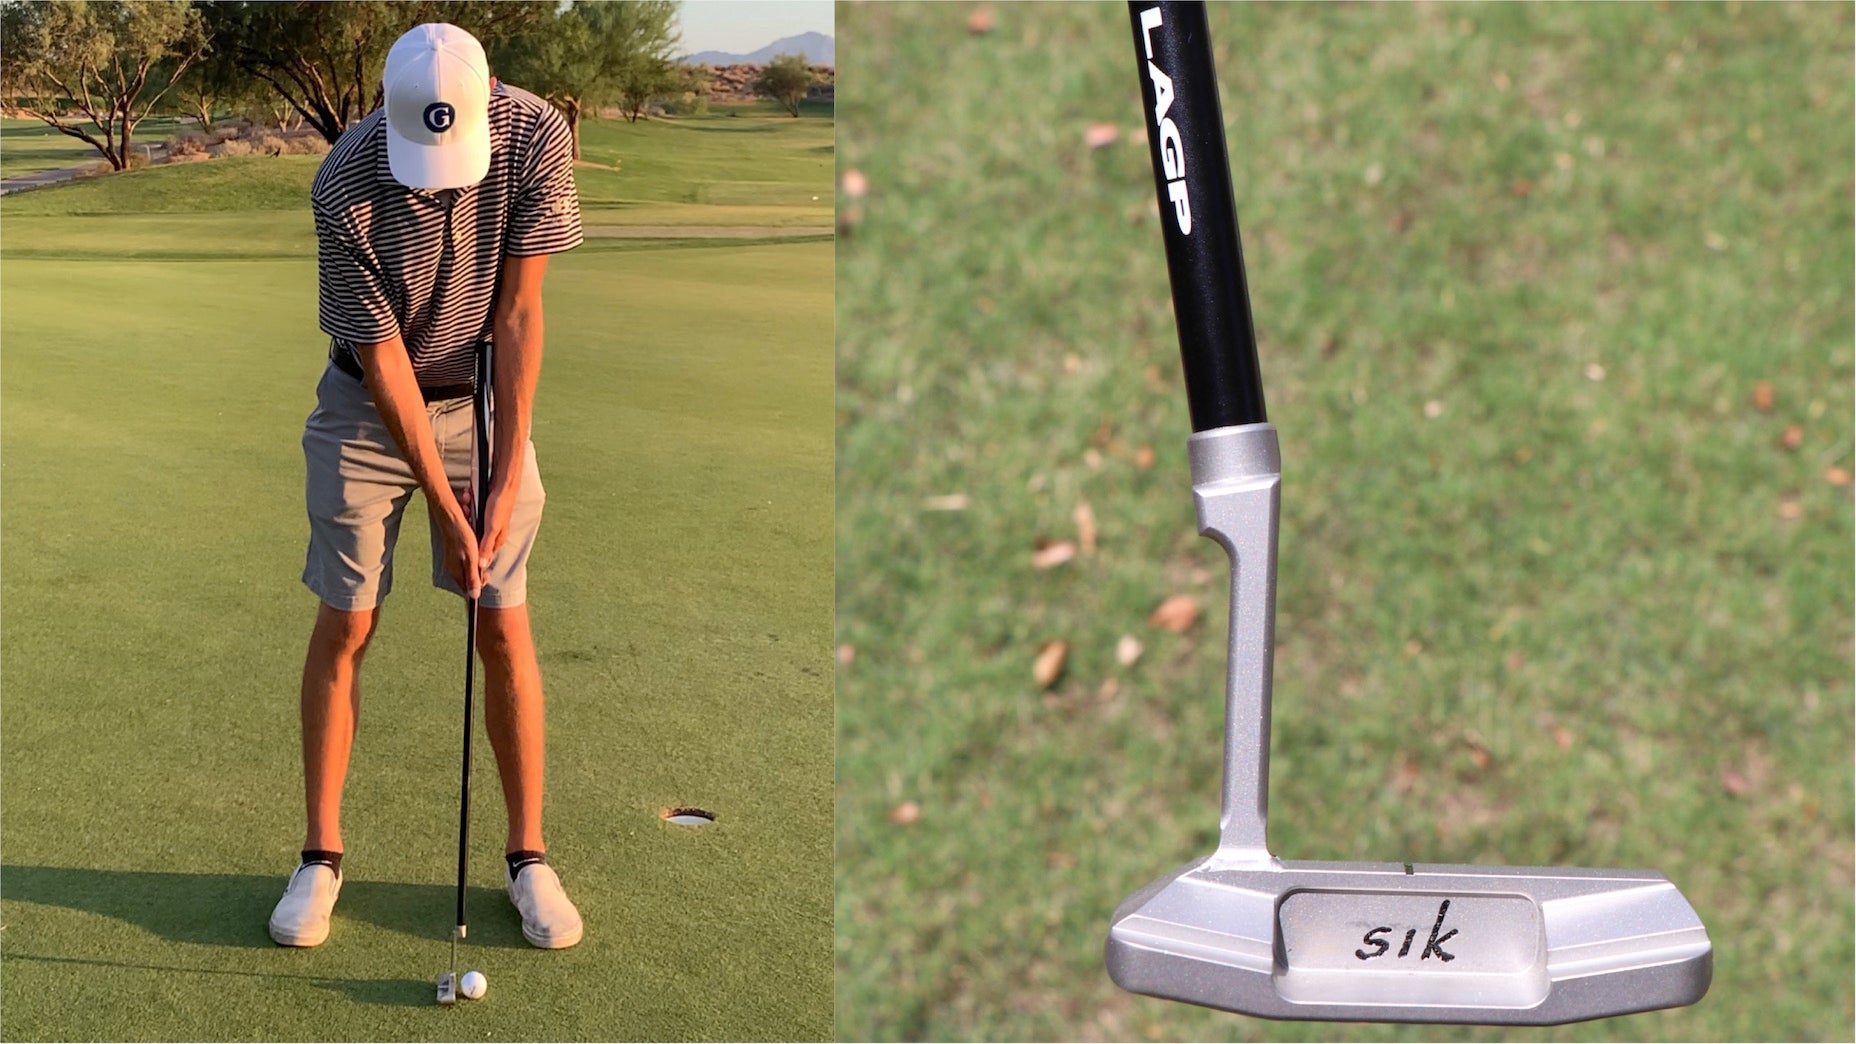 Does armlock putting actually help? I tested Bryson's putter to find out